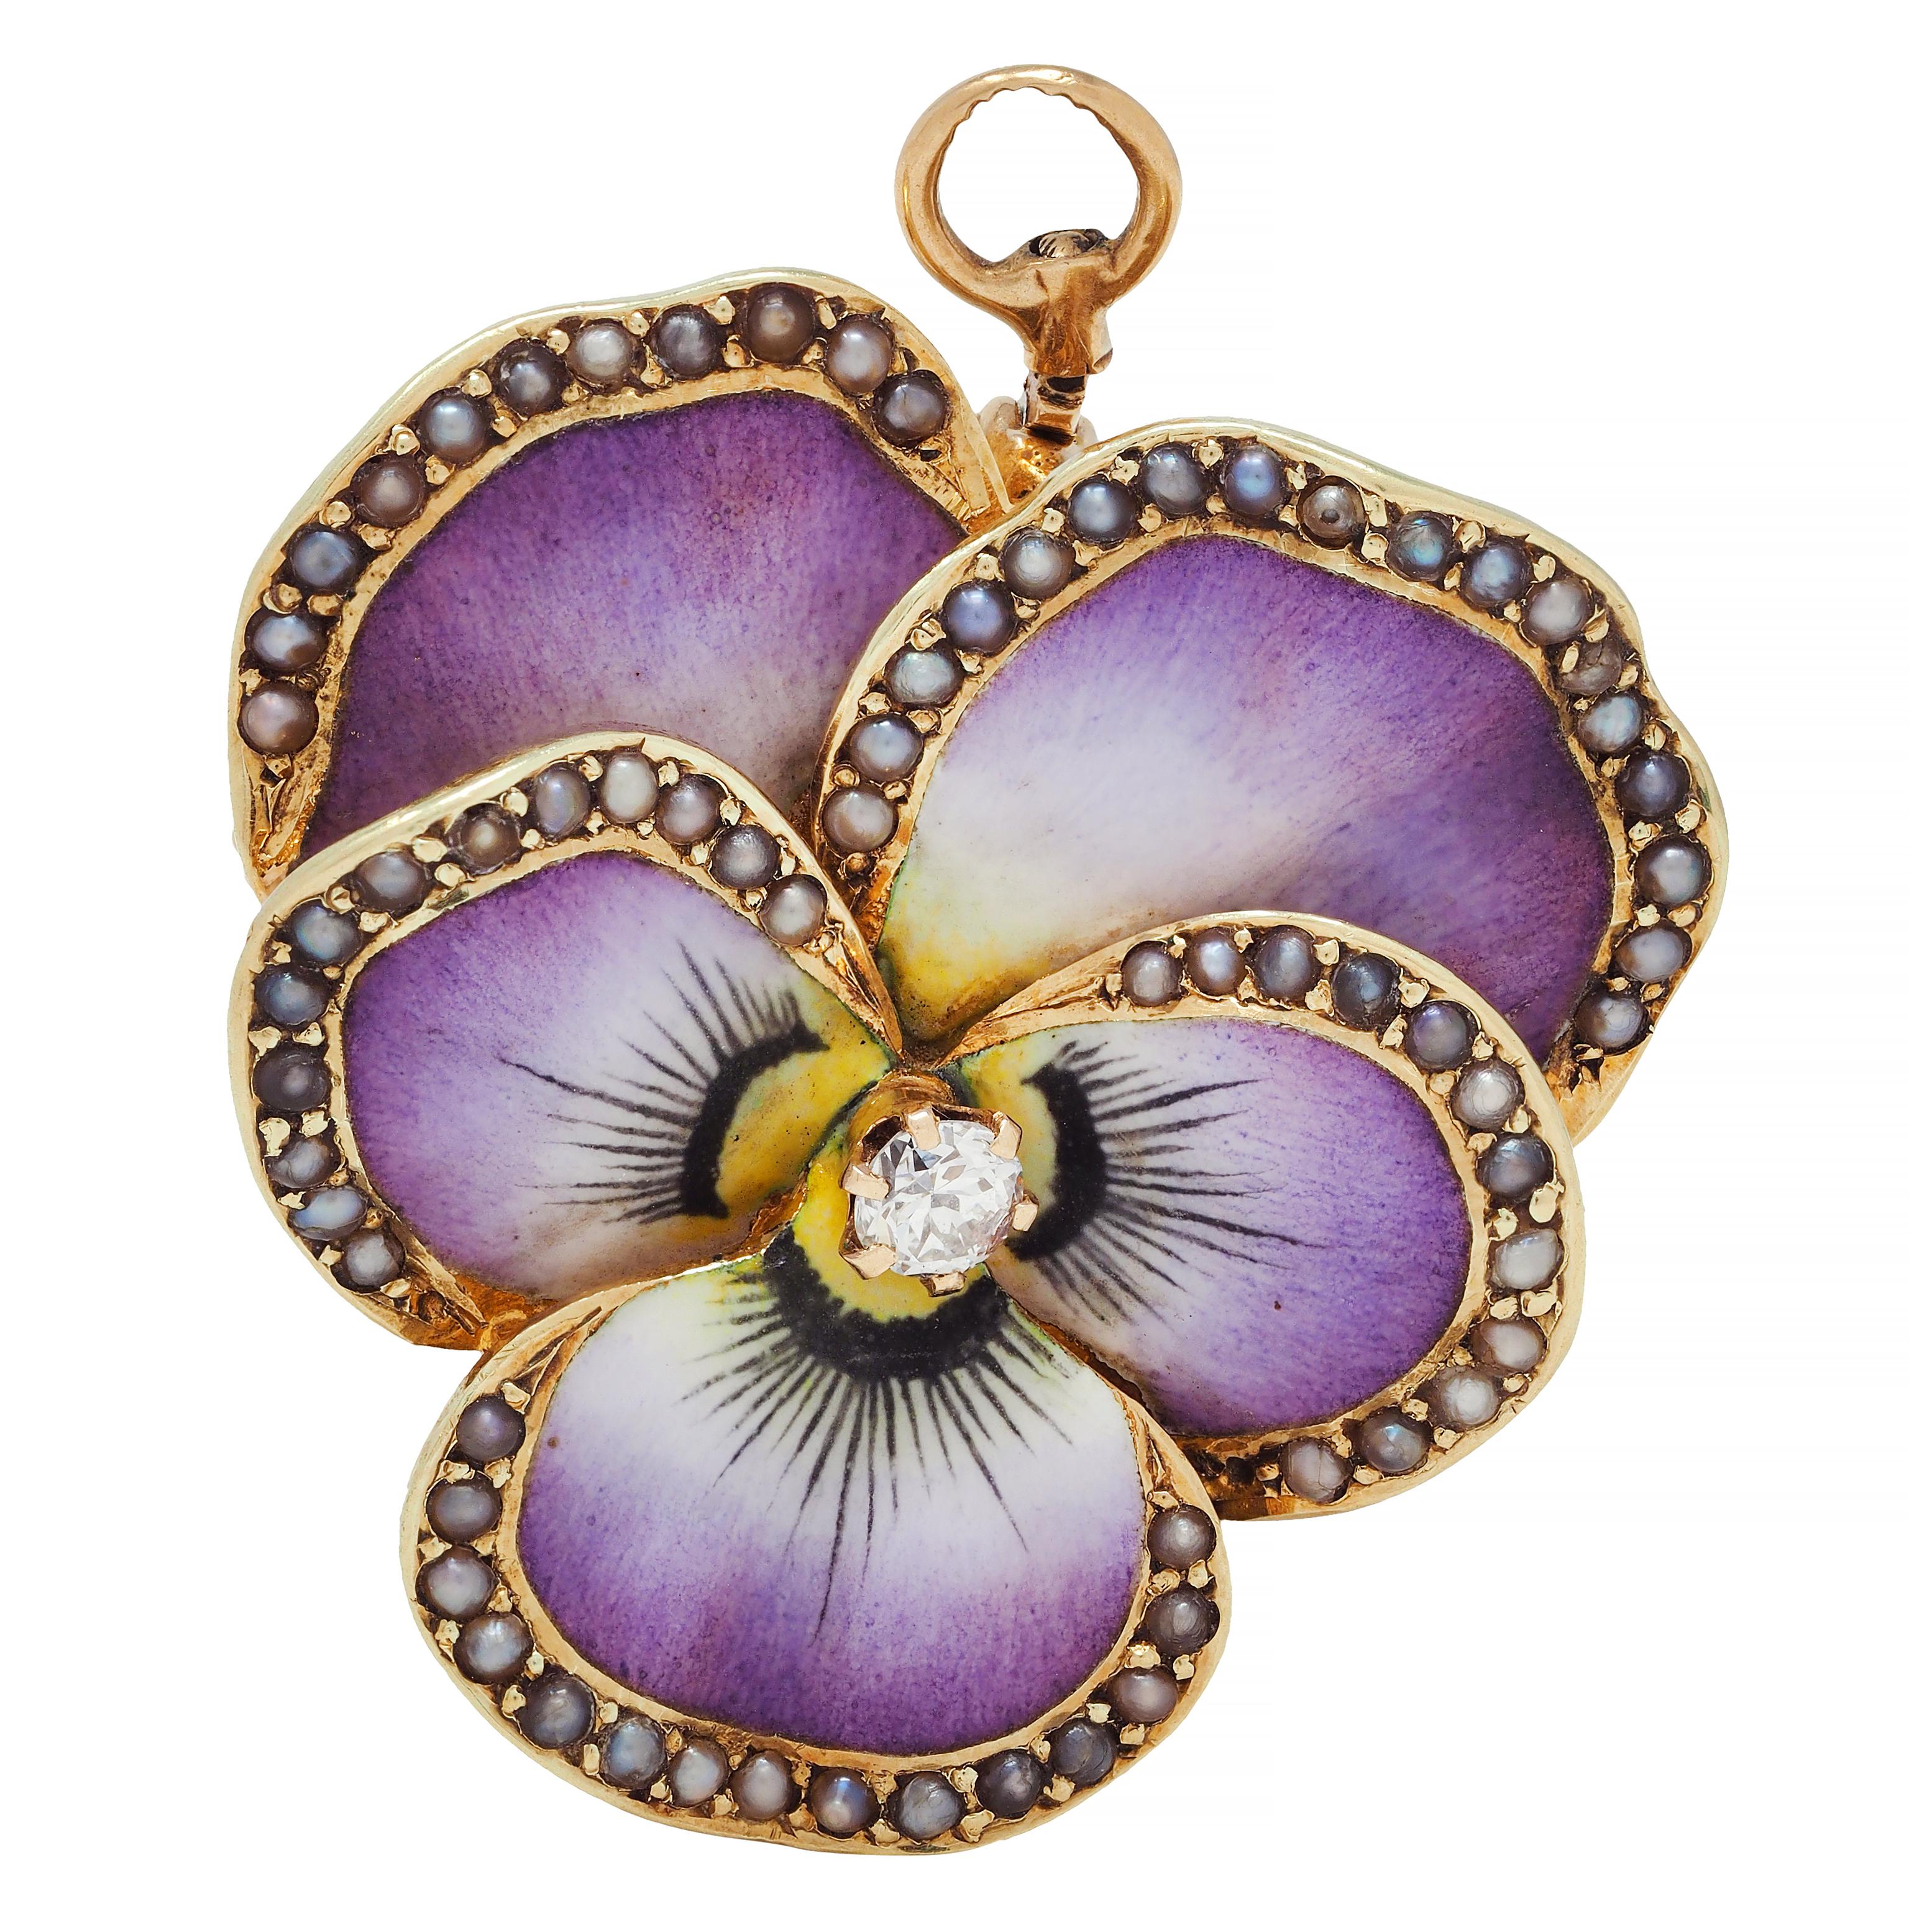 Pendant brooch is designed as a pansy flower with delicately painted matte enamel petals
Opaque purple, maroon, white, and yellow - exhibiting minimal loss
With bead set seed pearls along petal edges measuring 1.0 mm each
Ranging from cream to black